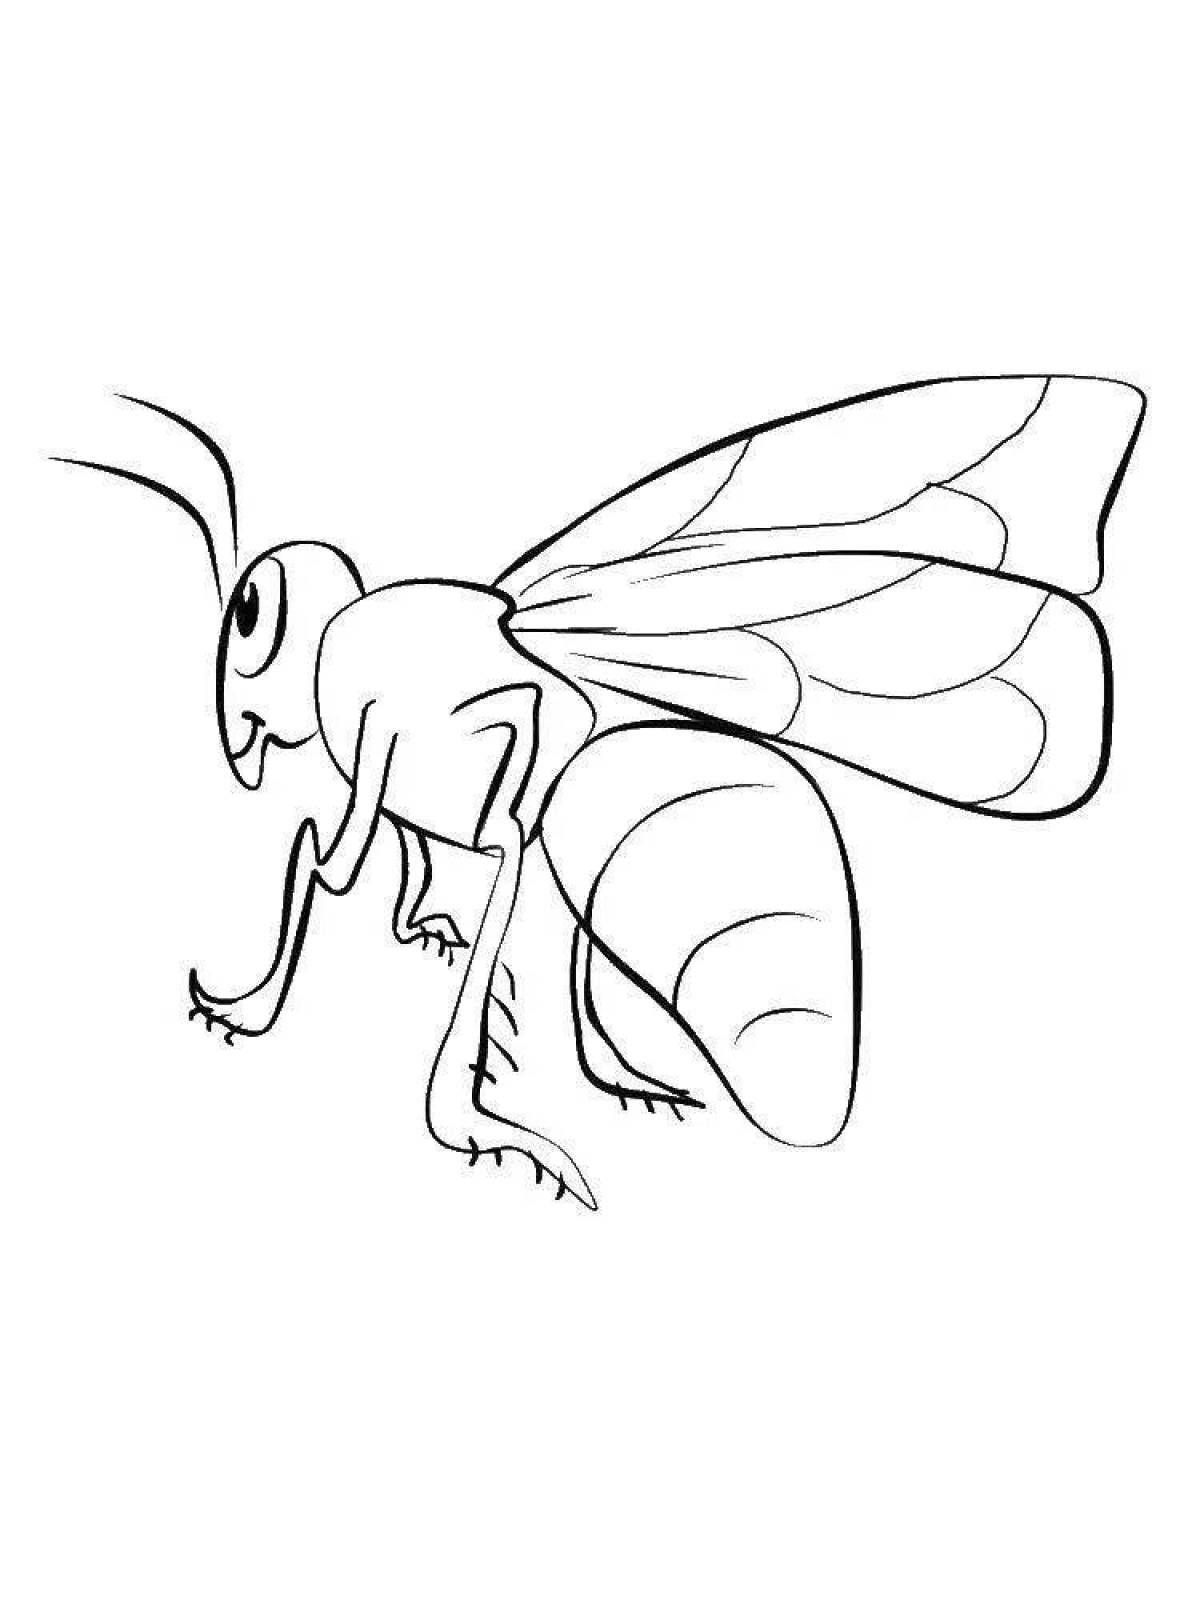 Colorful wasp coloring page for kids